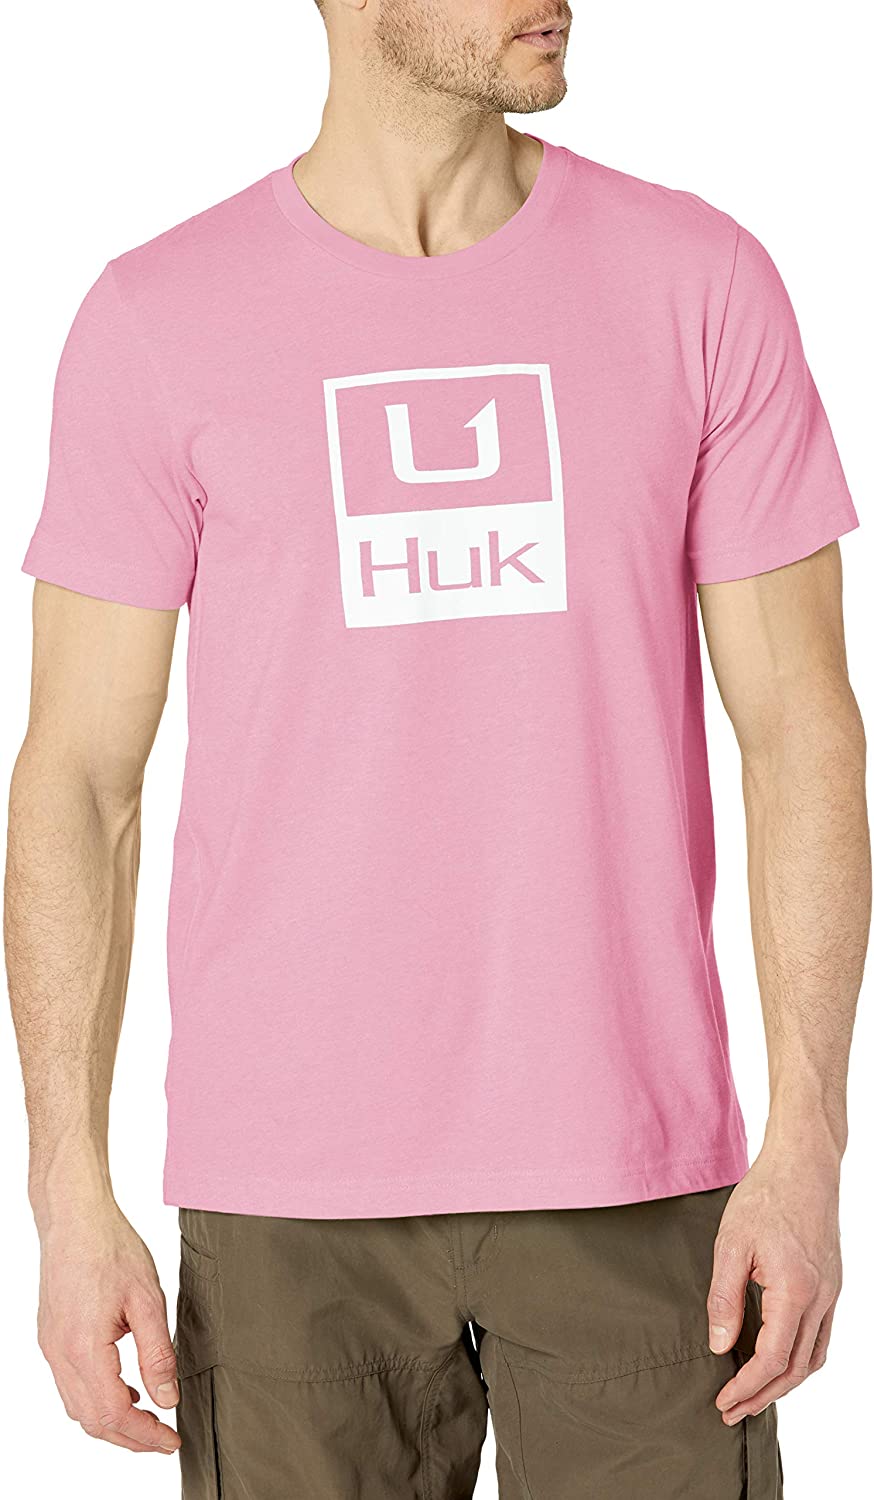 Men's Huk Huk'd Up Performance Tee in Seashell Pink Heather from the front